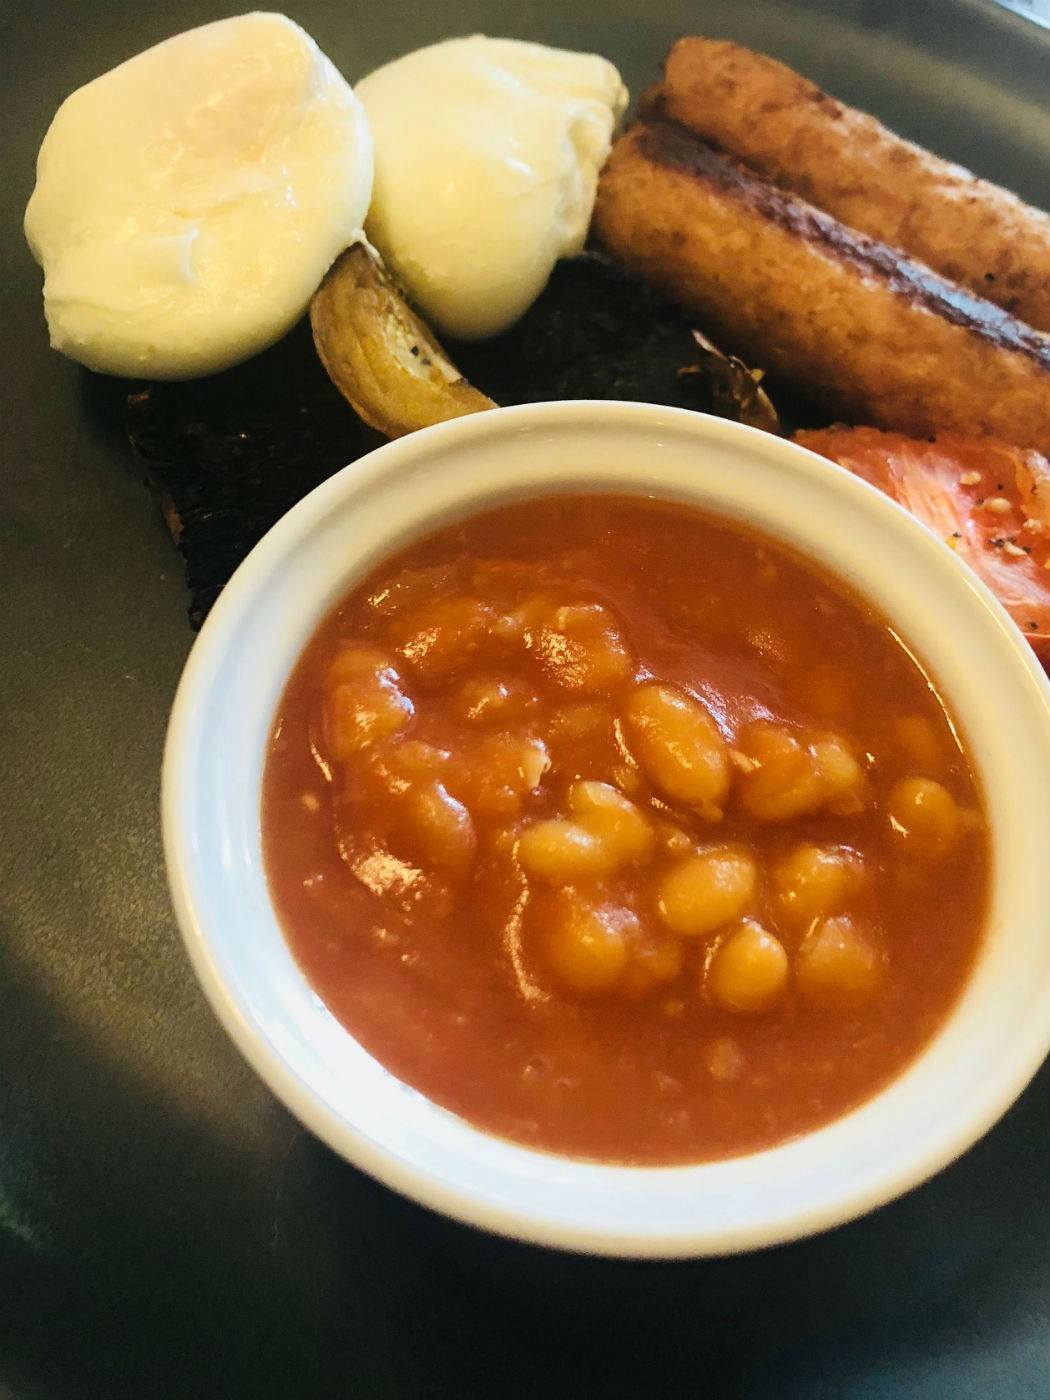 baked beans in a white bowl with poached eggs and sausages